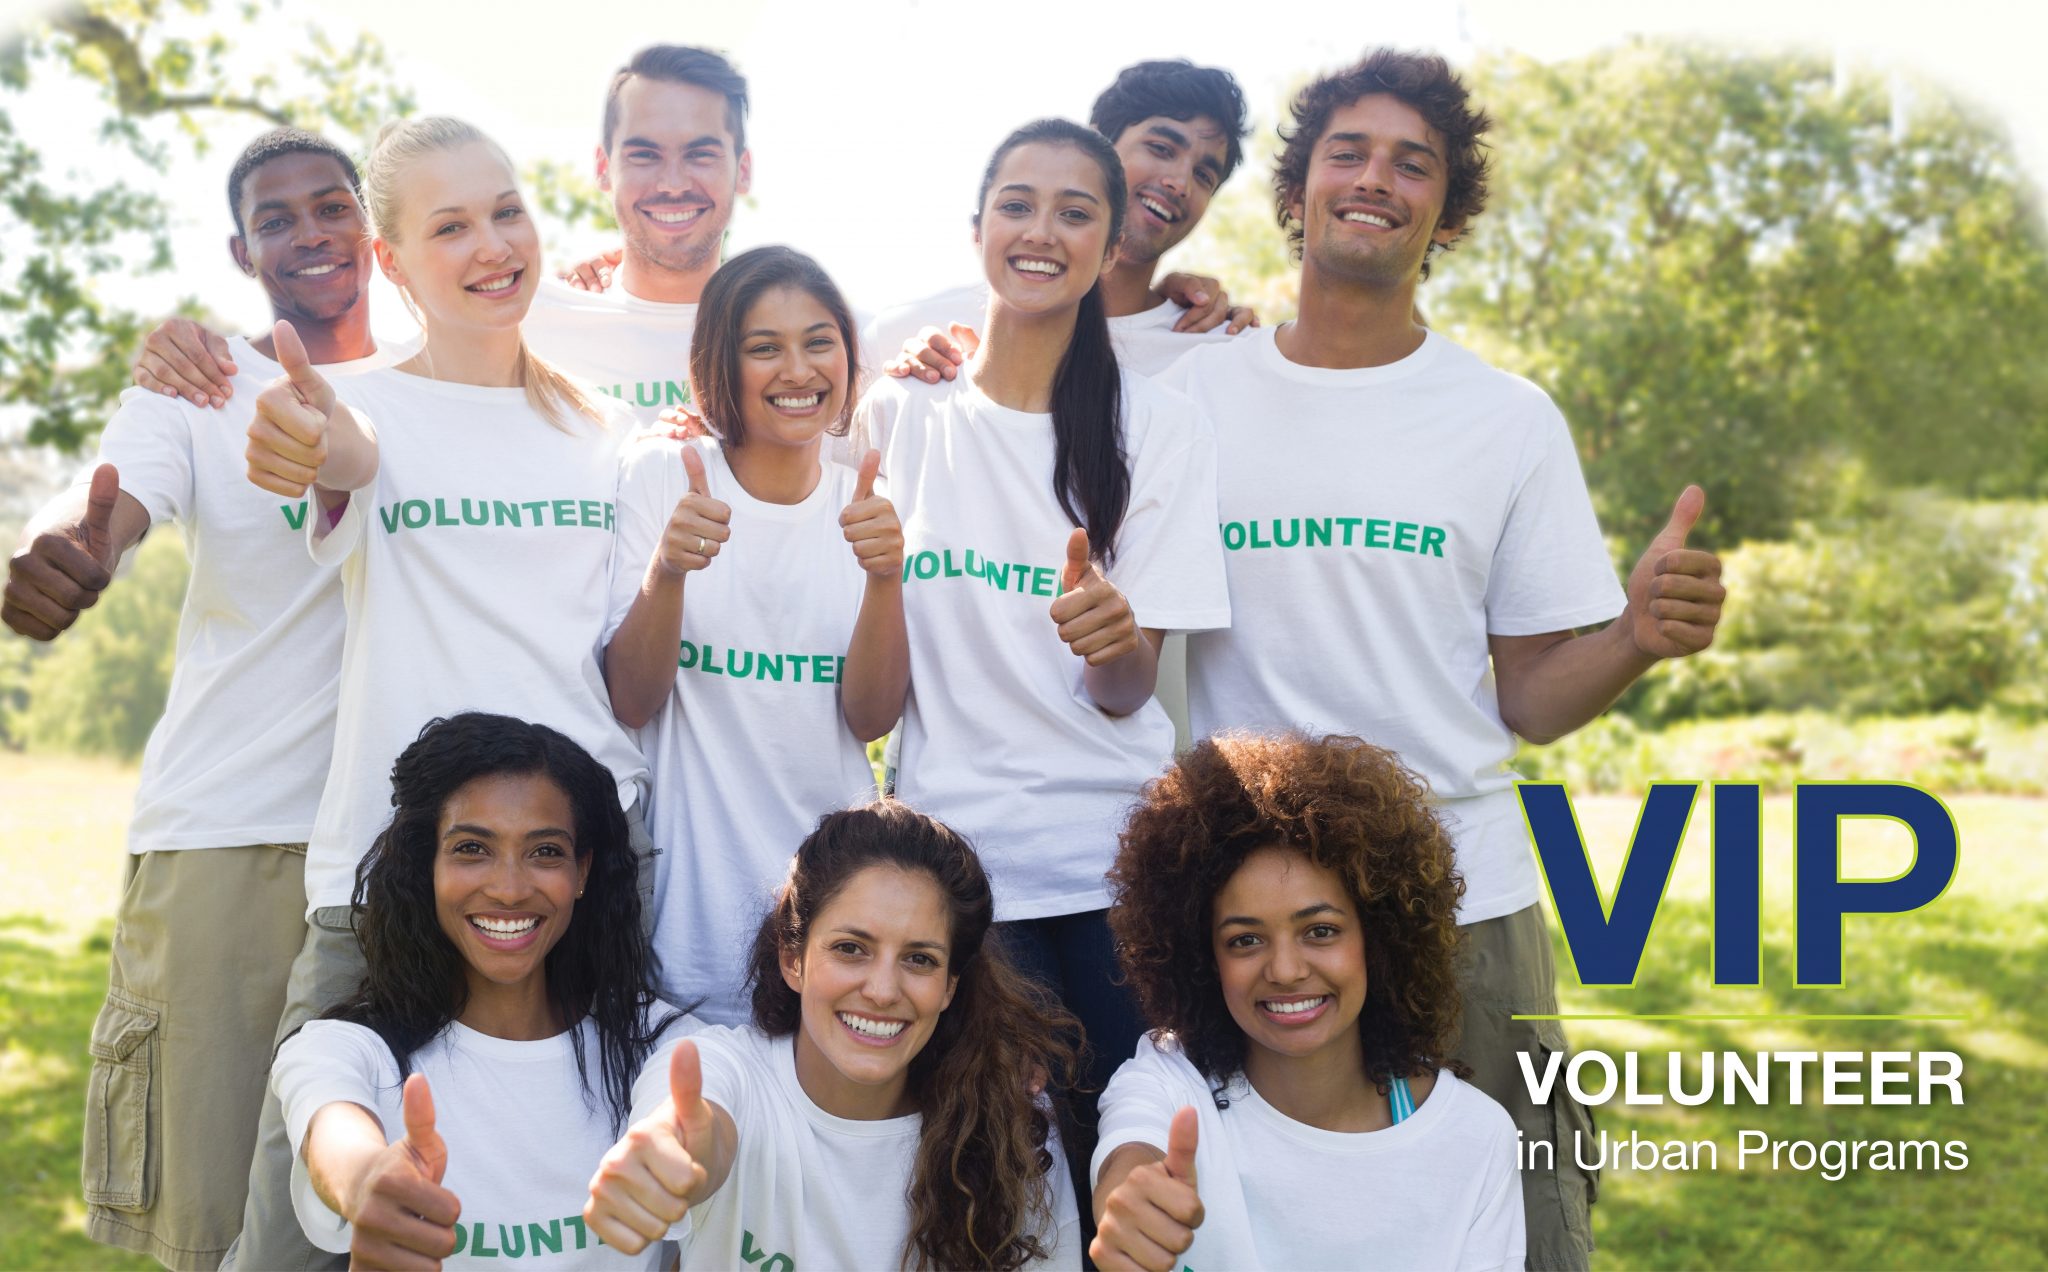 Group of ethnically diverse college students pose in Volunteer t-shirts.